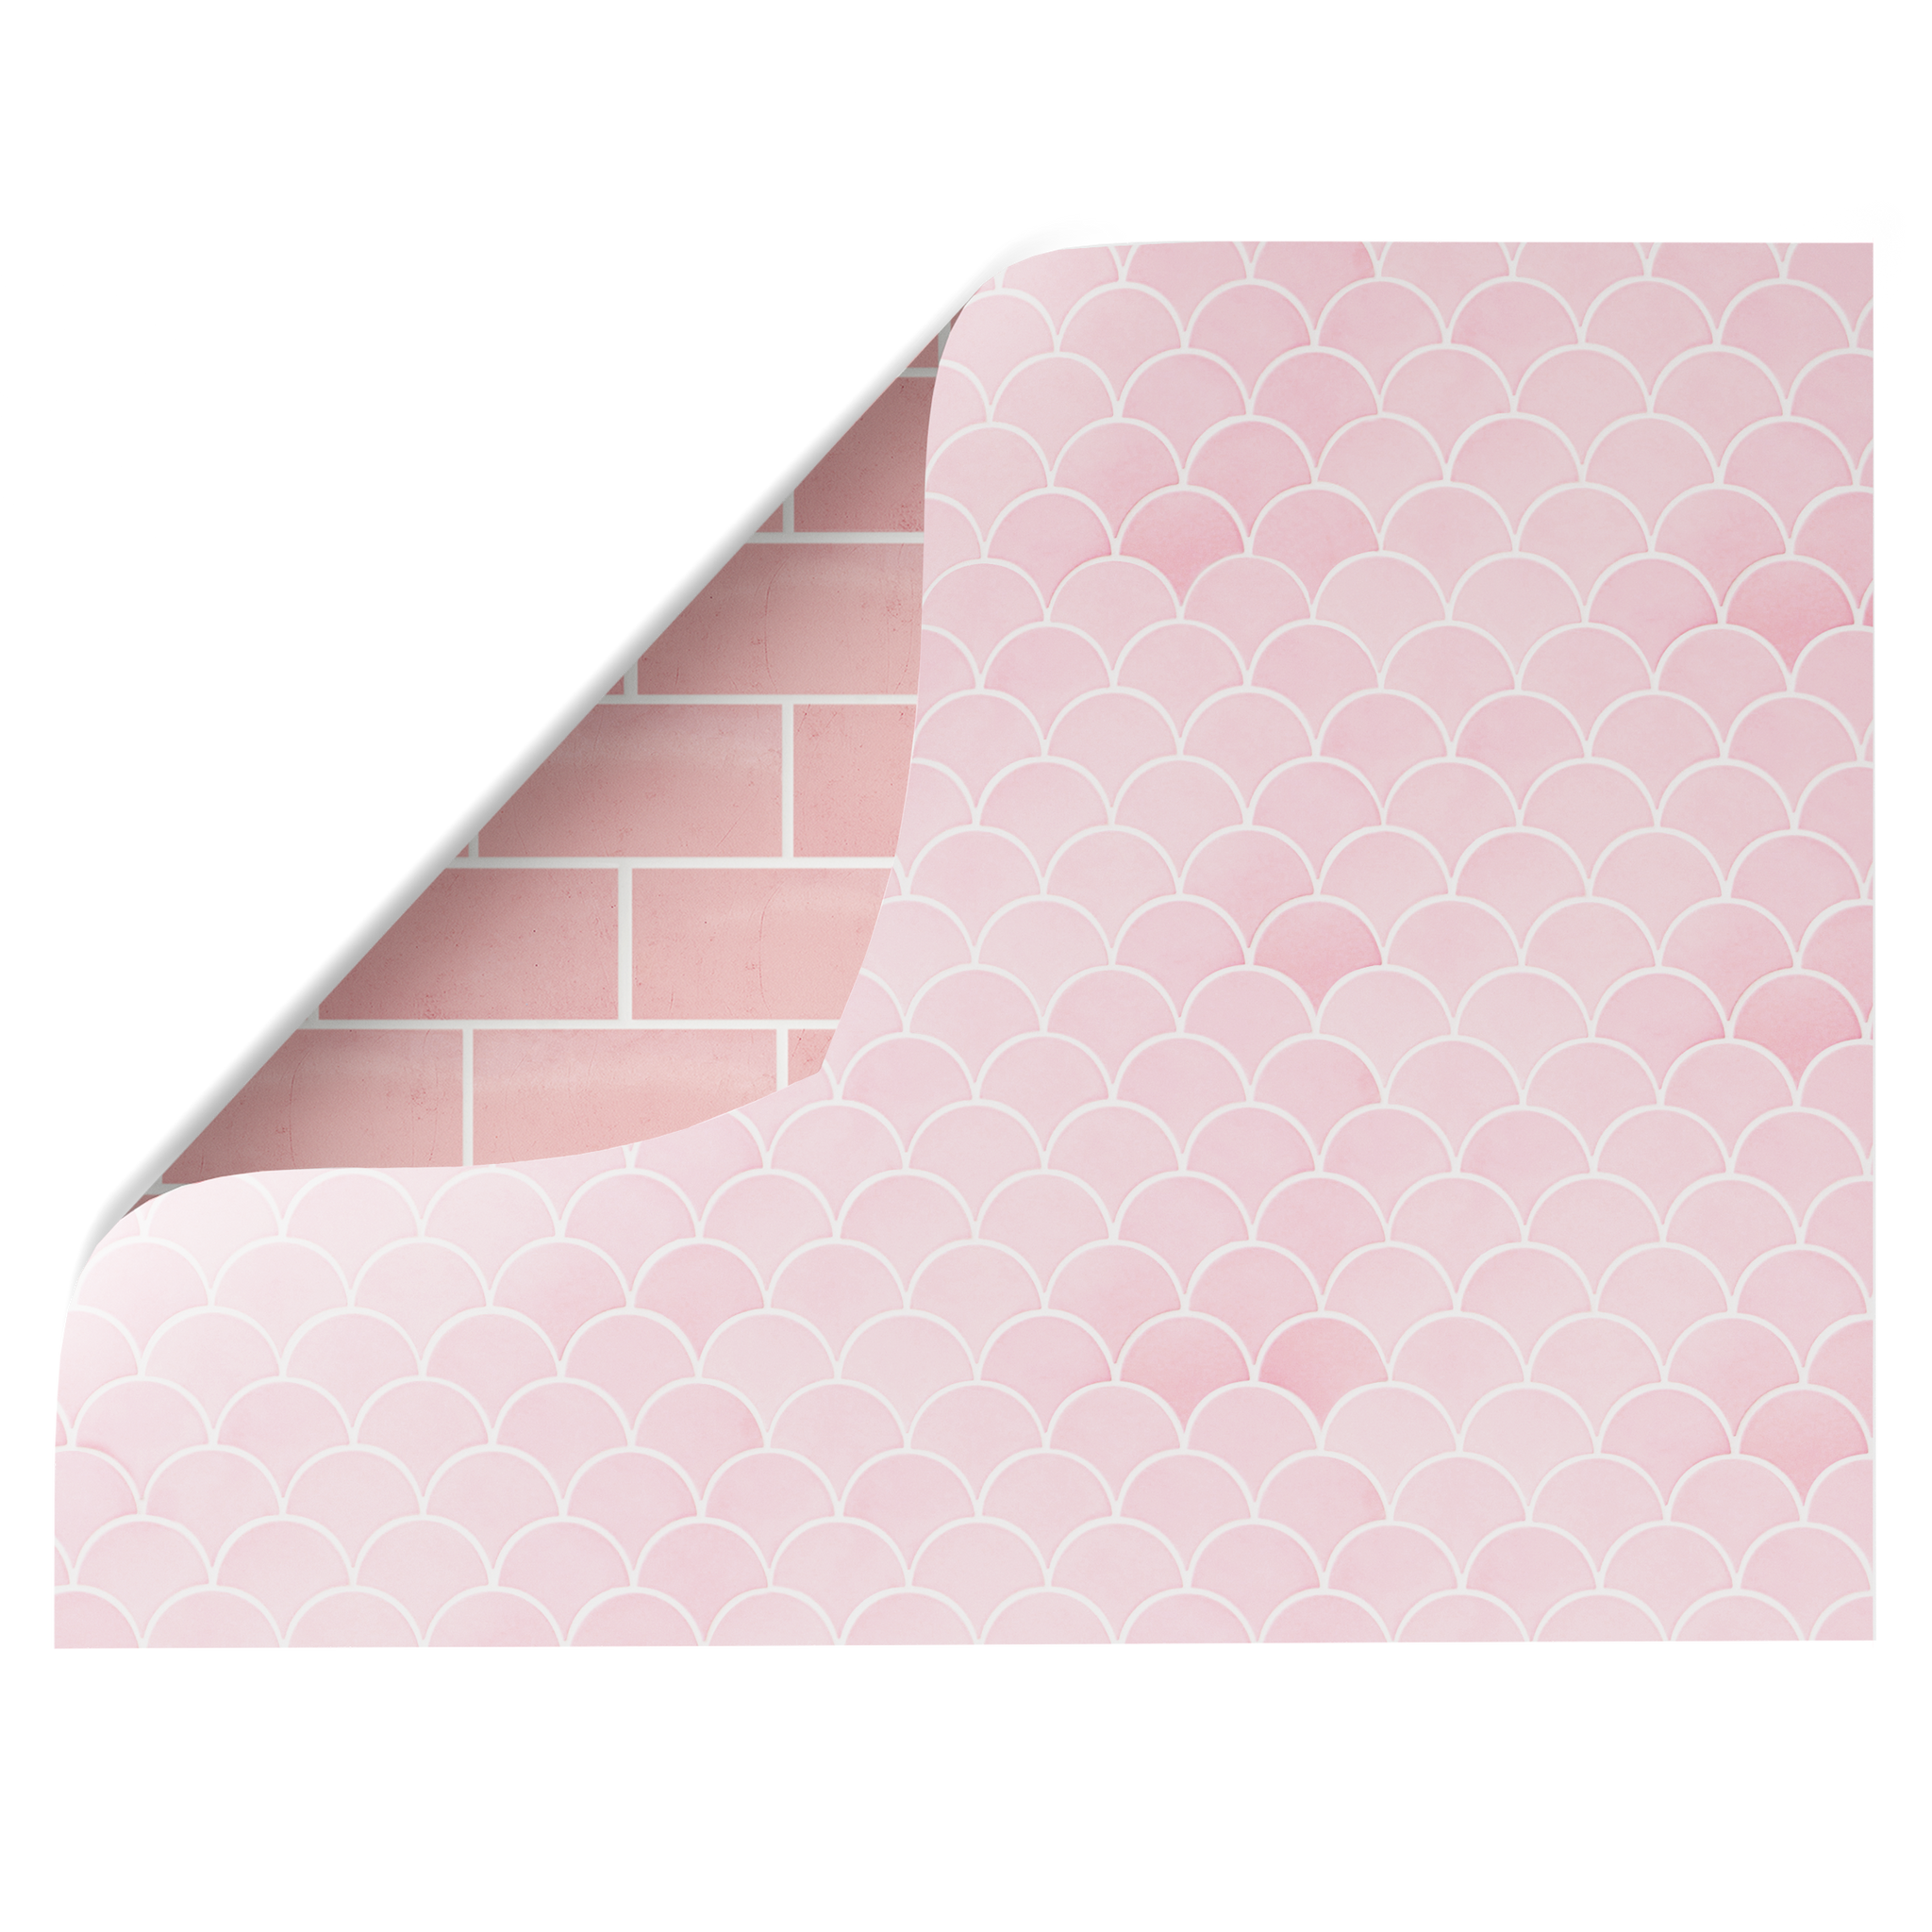 Pretty In Pink fish scale Tile Double-sided vinyl Backdrop - Backdrop Collective